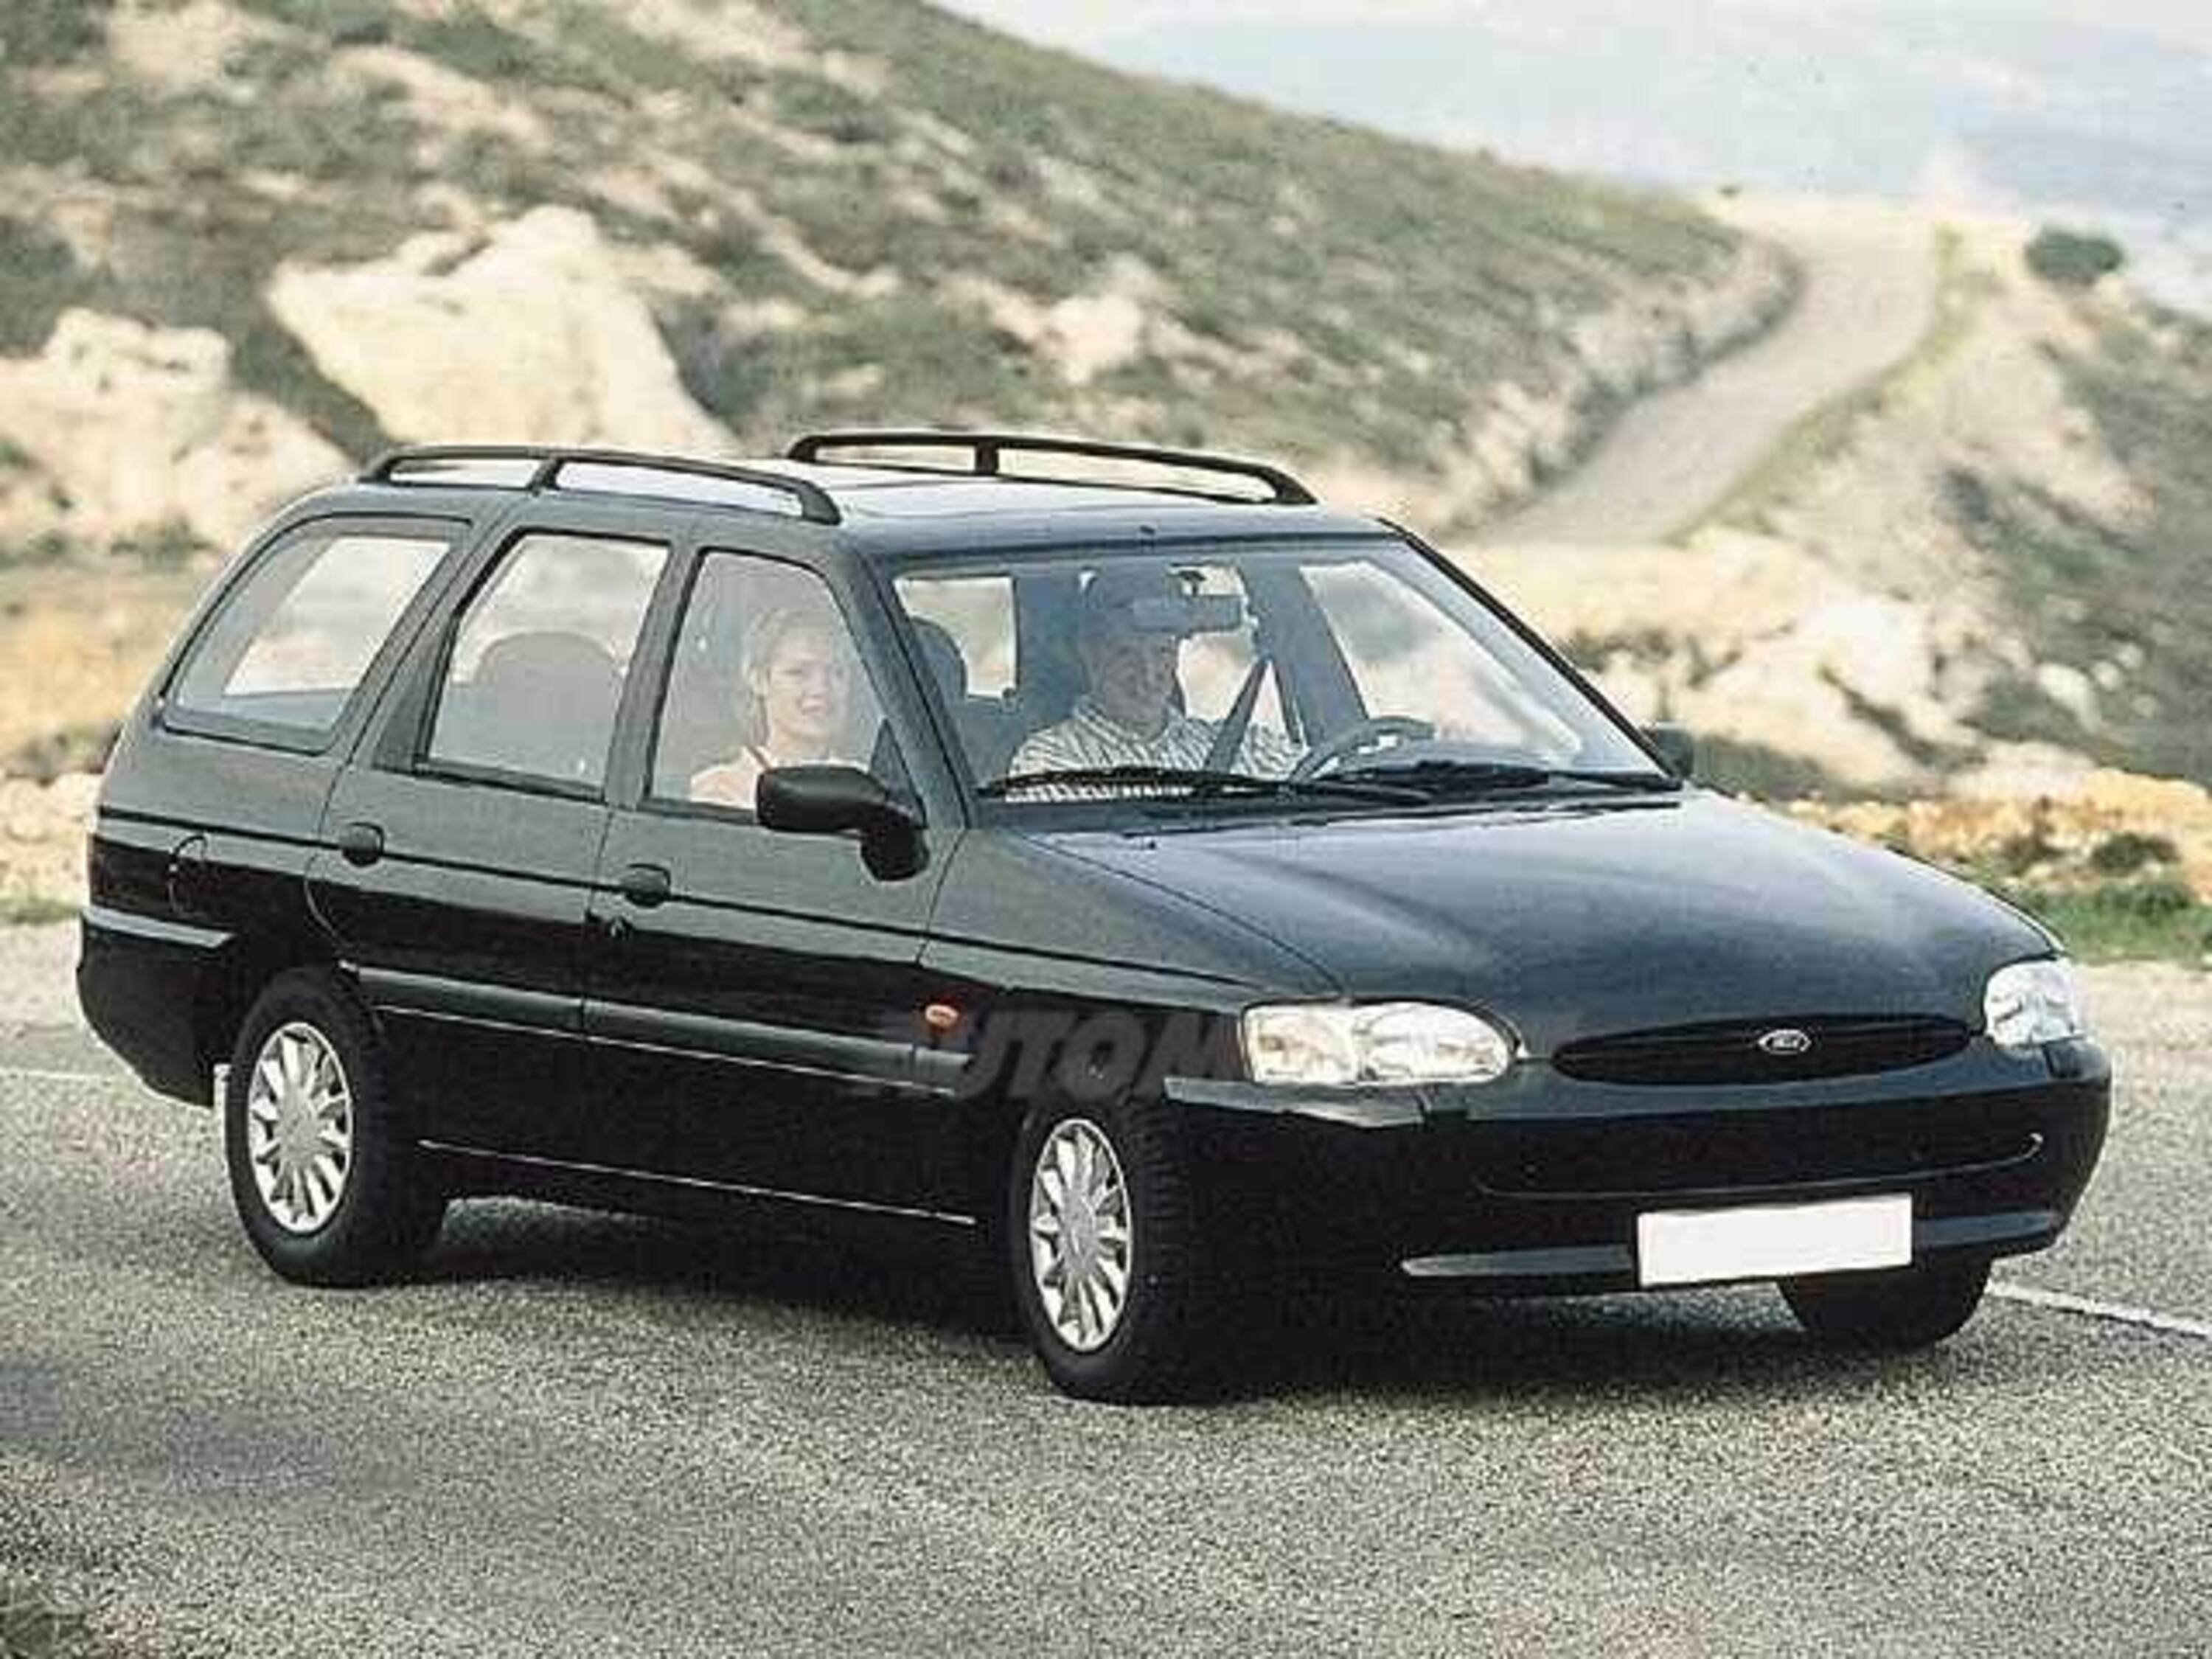 Ford Escort/Orion Station Wagon 1.8 diesel cat S.W. CLX